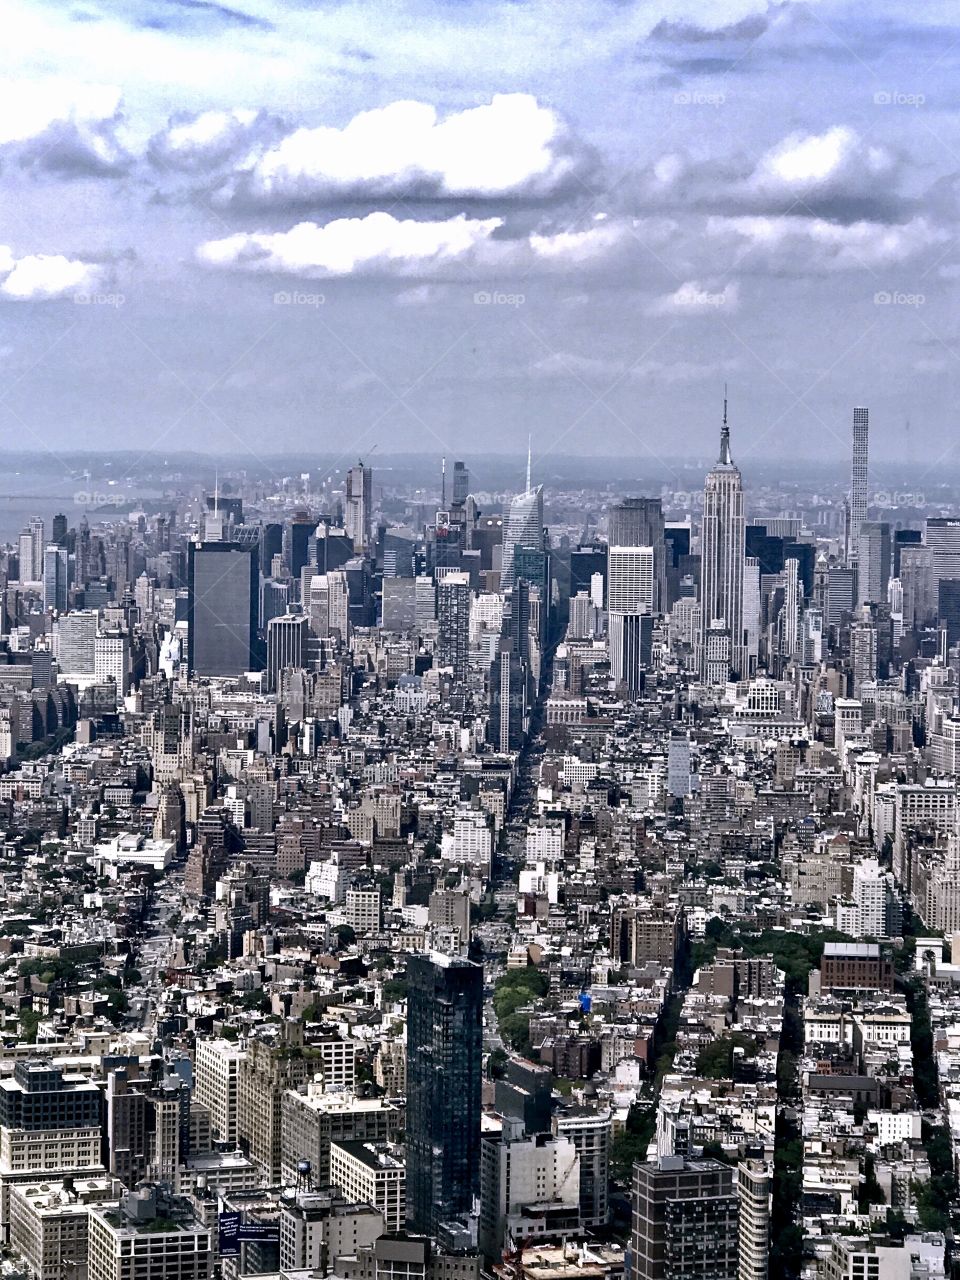 View from top of One World Trade Center, New York City 